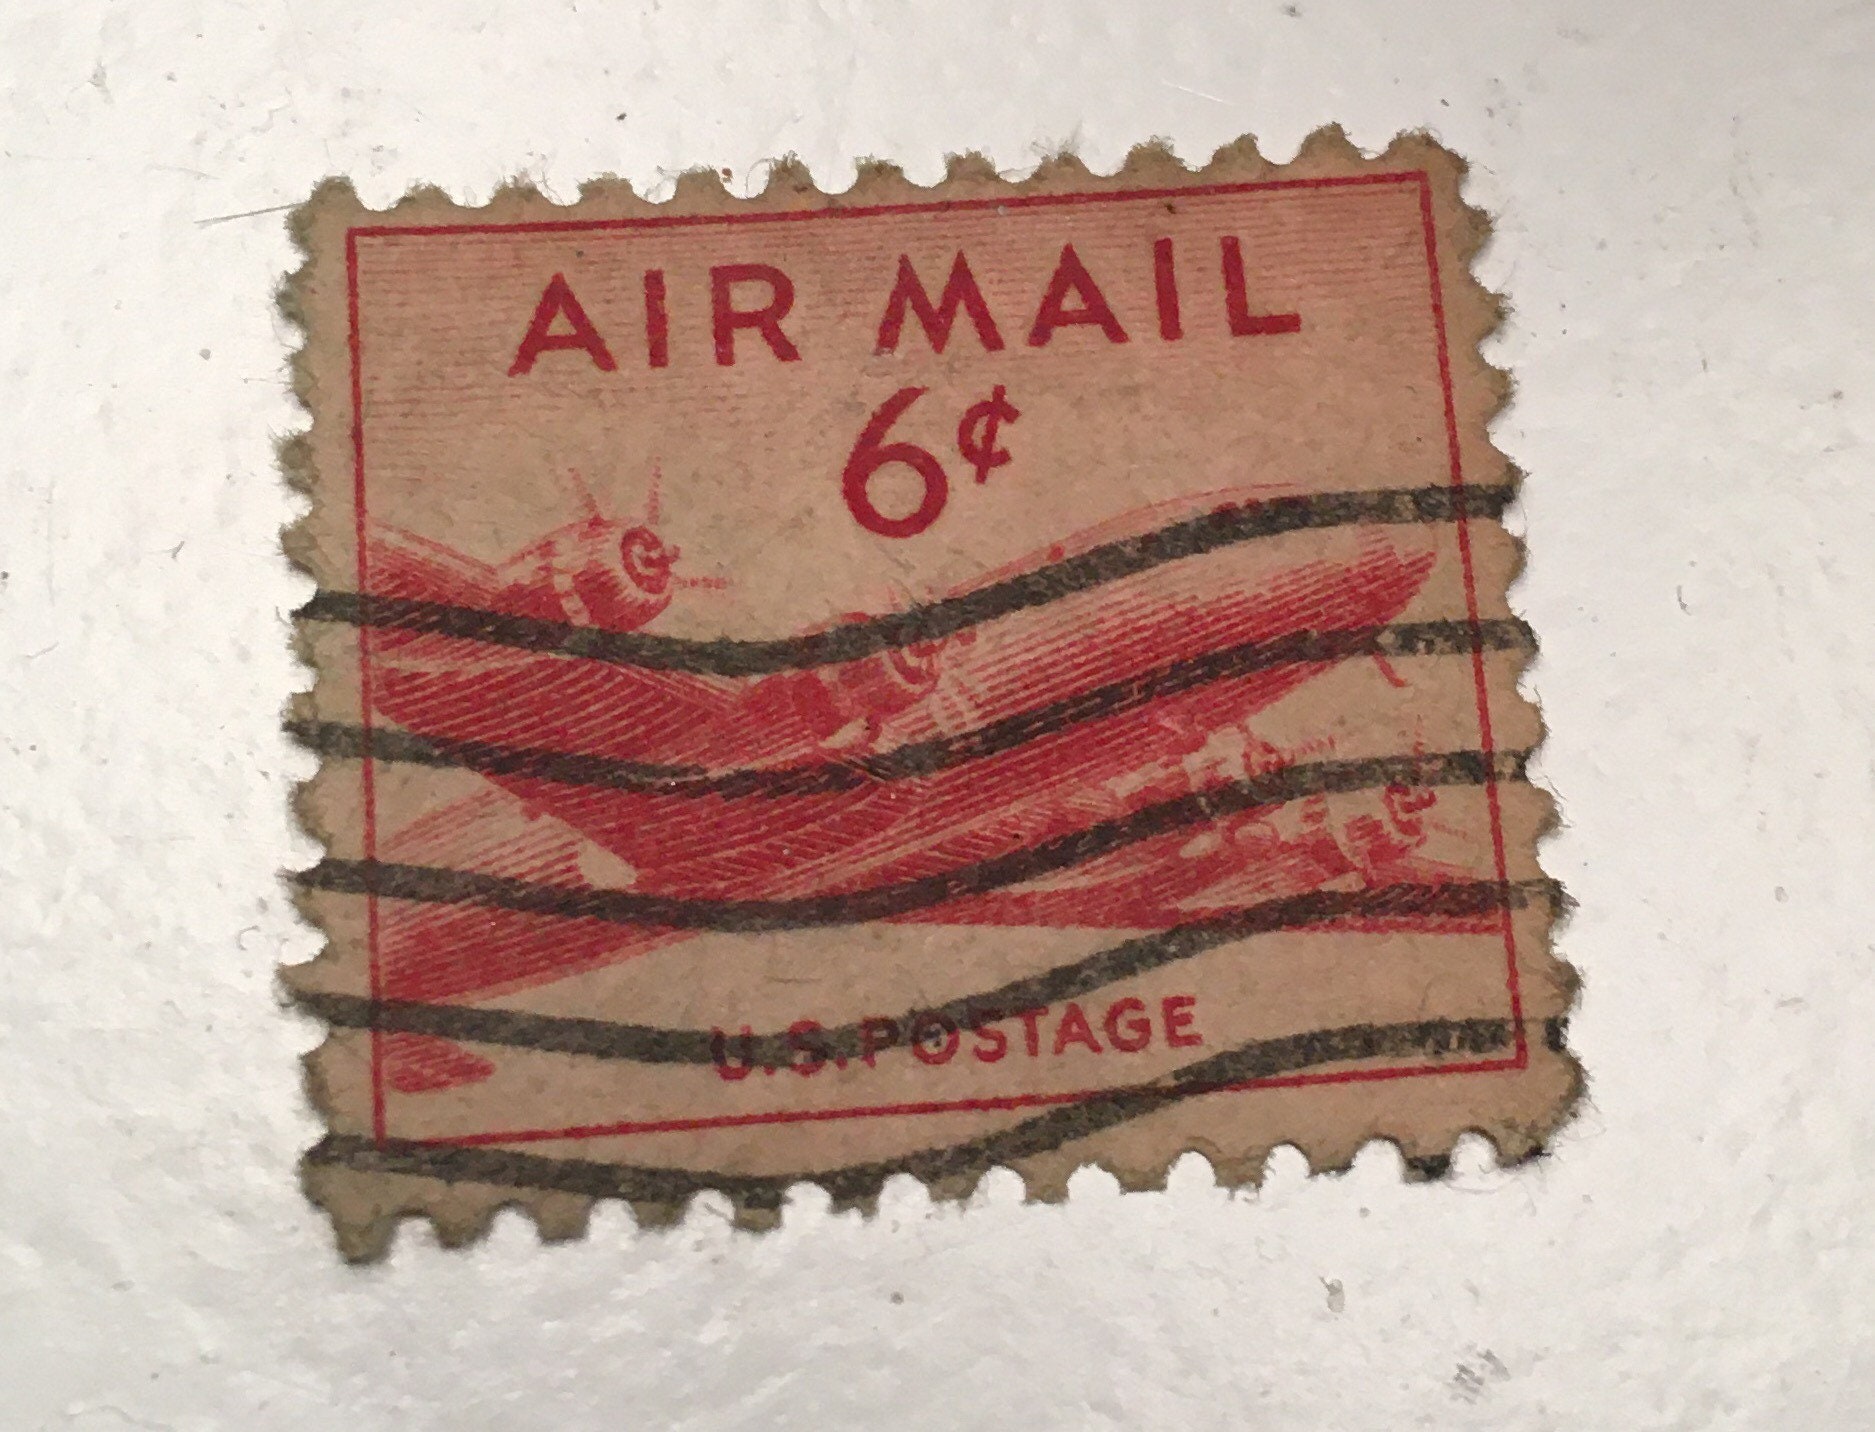 Lot - RARE 3 Cent Liberty, 6 Cent Air Mail Stamps